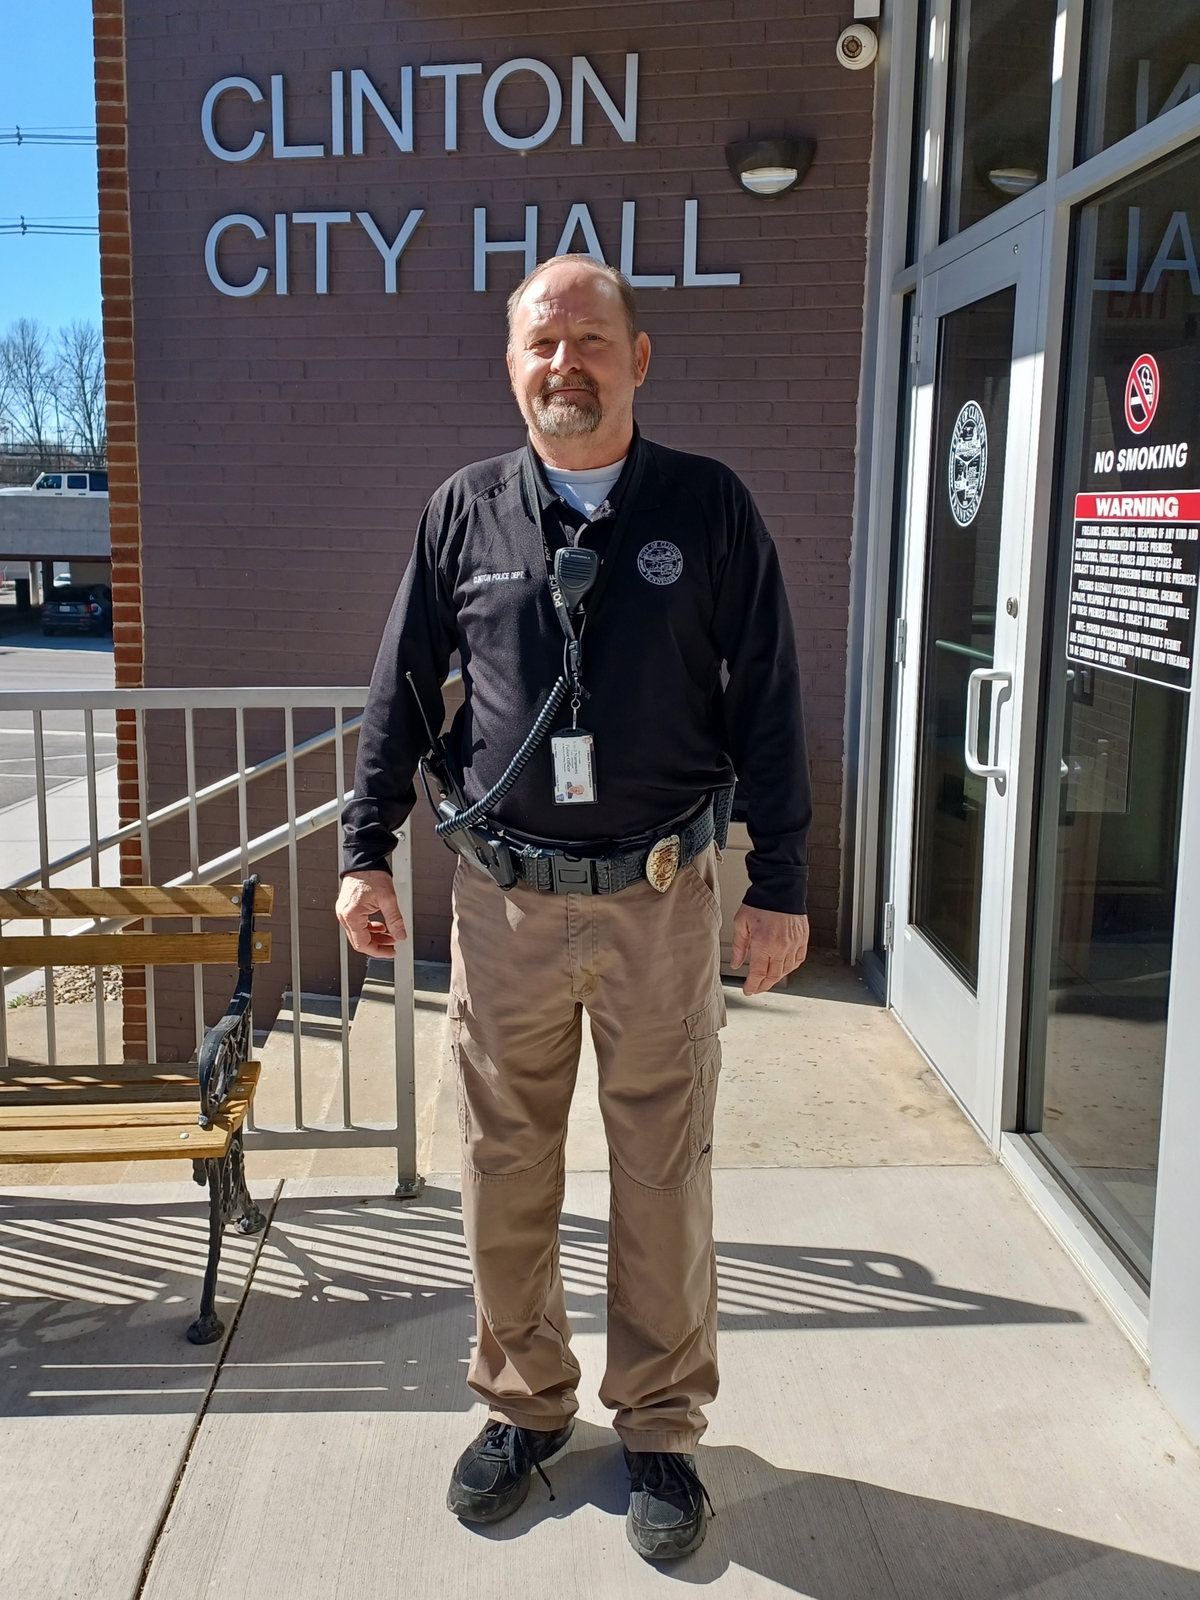 CECIL NARRAMORE Animal Control Officer